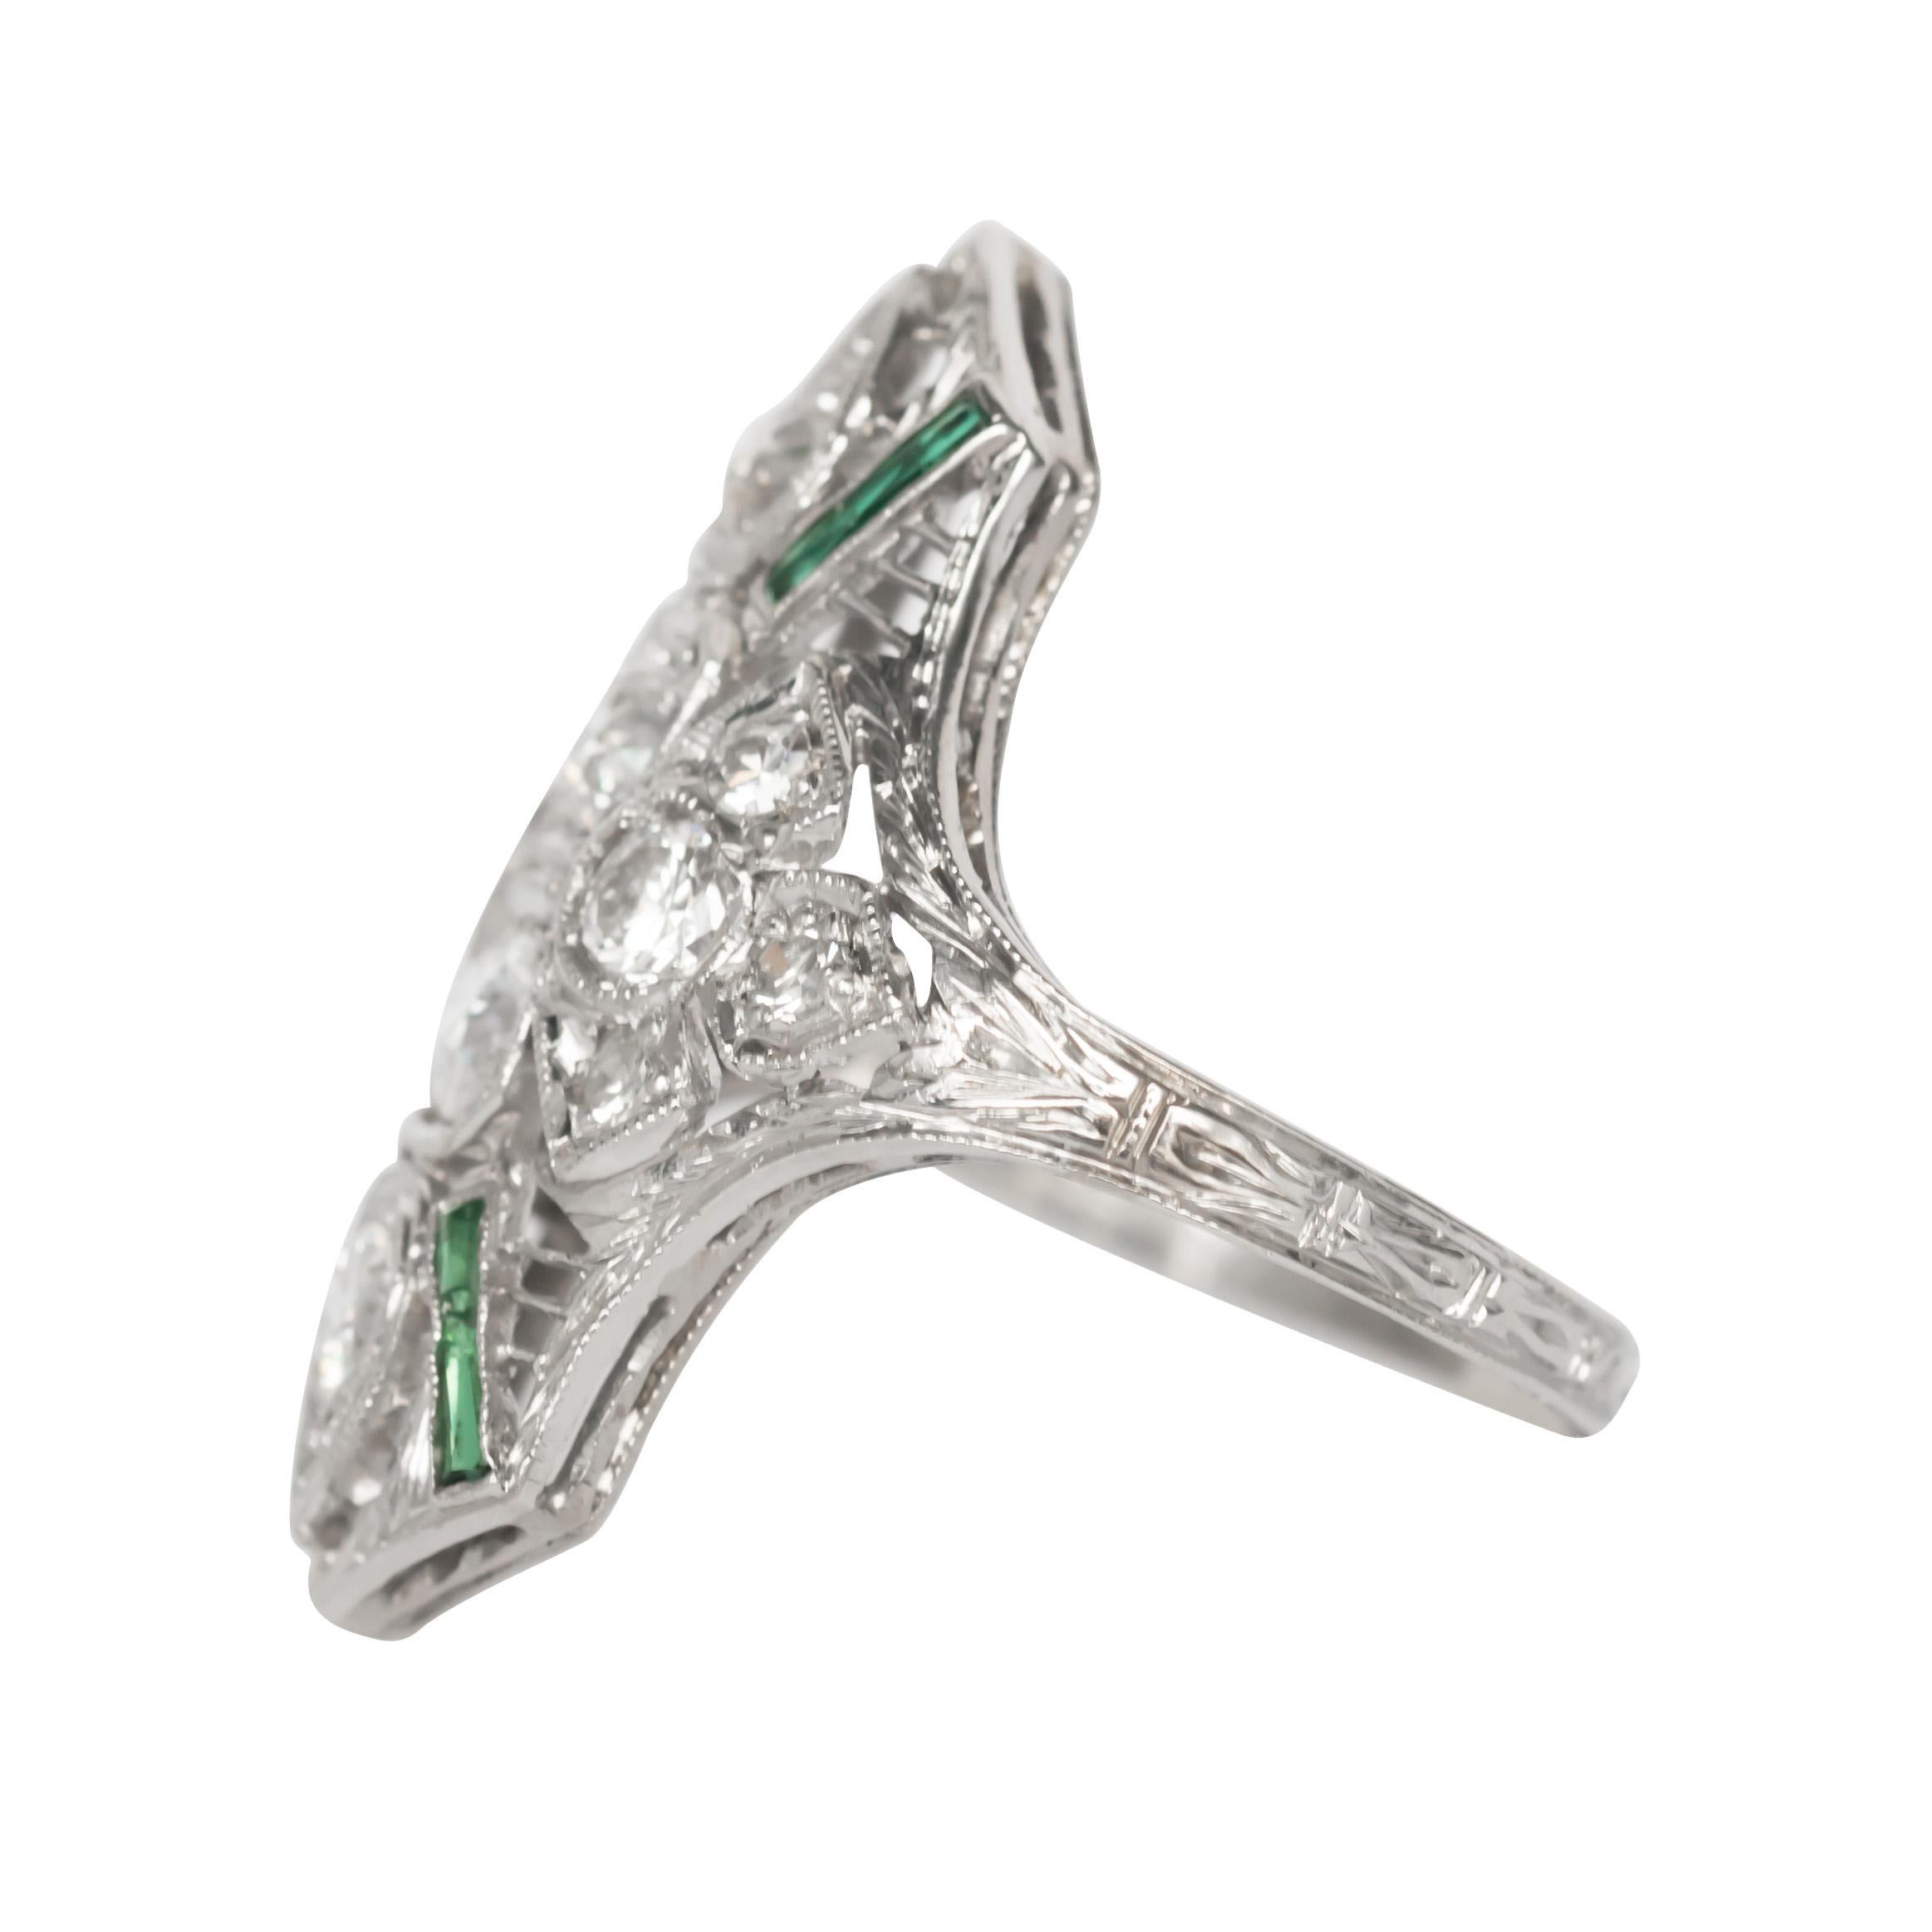 Ring Size: 6.5
Metal Type: Platinum 
Weight: 6.4 grams

Center Diamond Details
Shape: Old European Brilliant 
Total Carat Weight: .50 carat, total weight
Color: F
Clarity: VS

Color Stone Details: 
Type: Synthetic Emerald 
Shape: French Cut 
Total